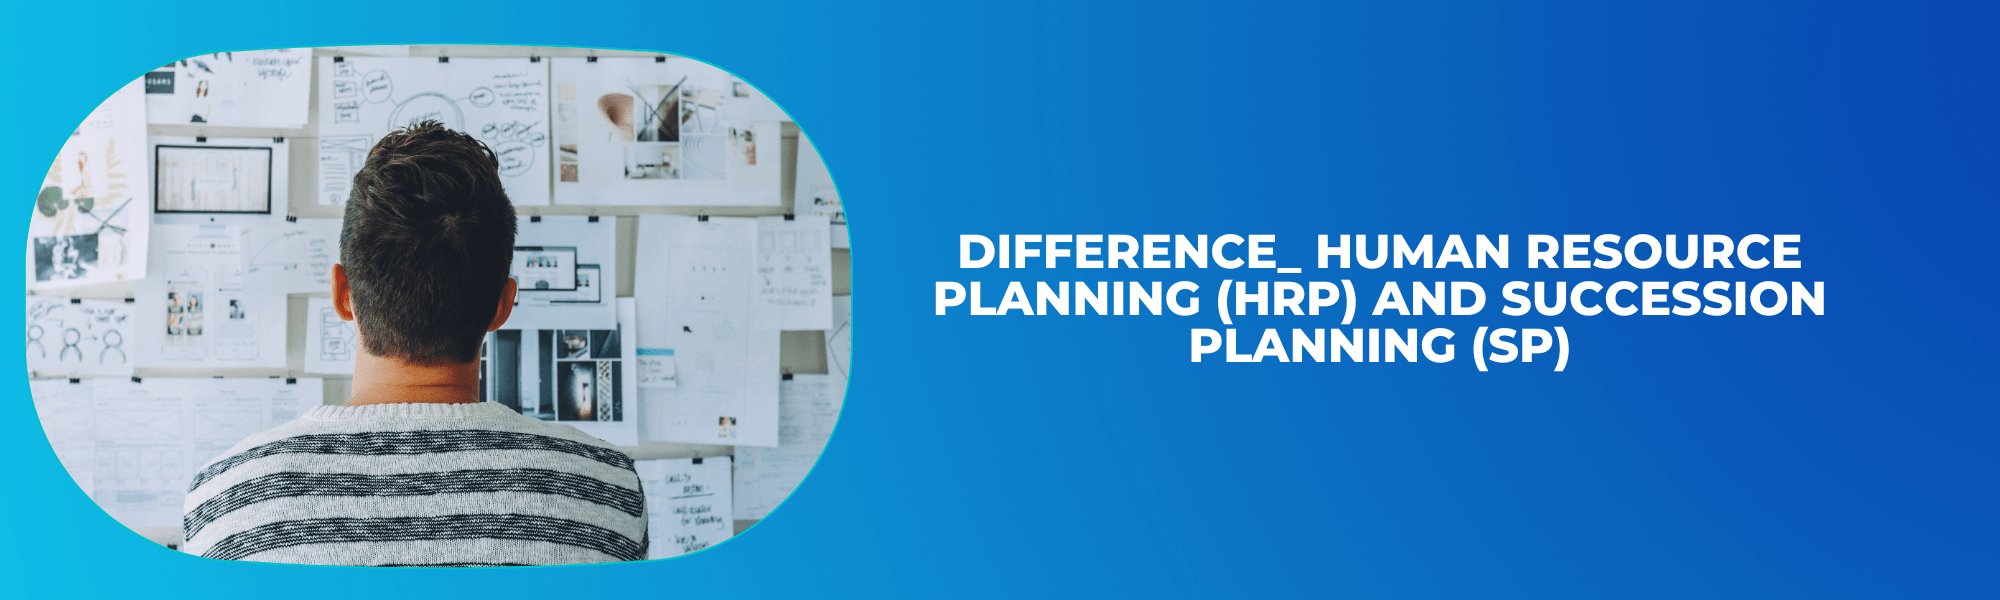 Difference: Human Resource Planning (HRP) and Succession Planning (SP)